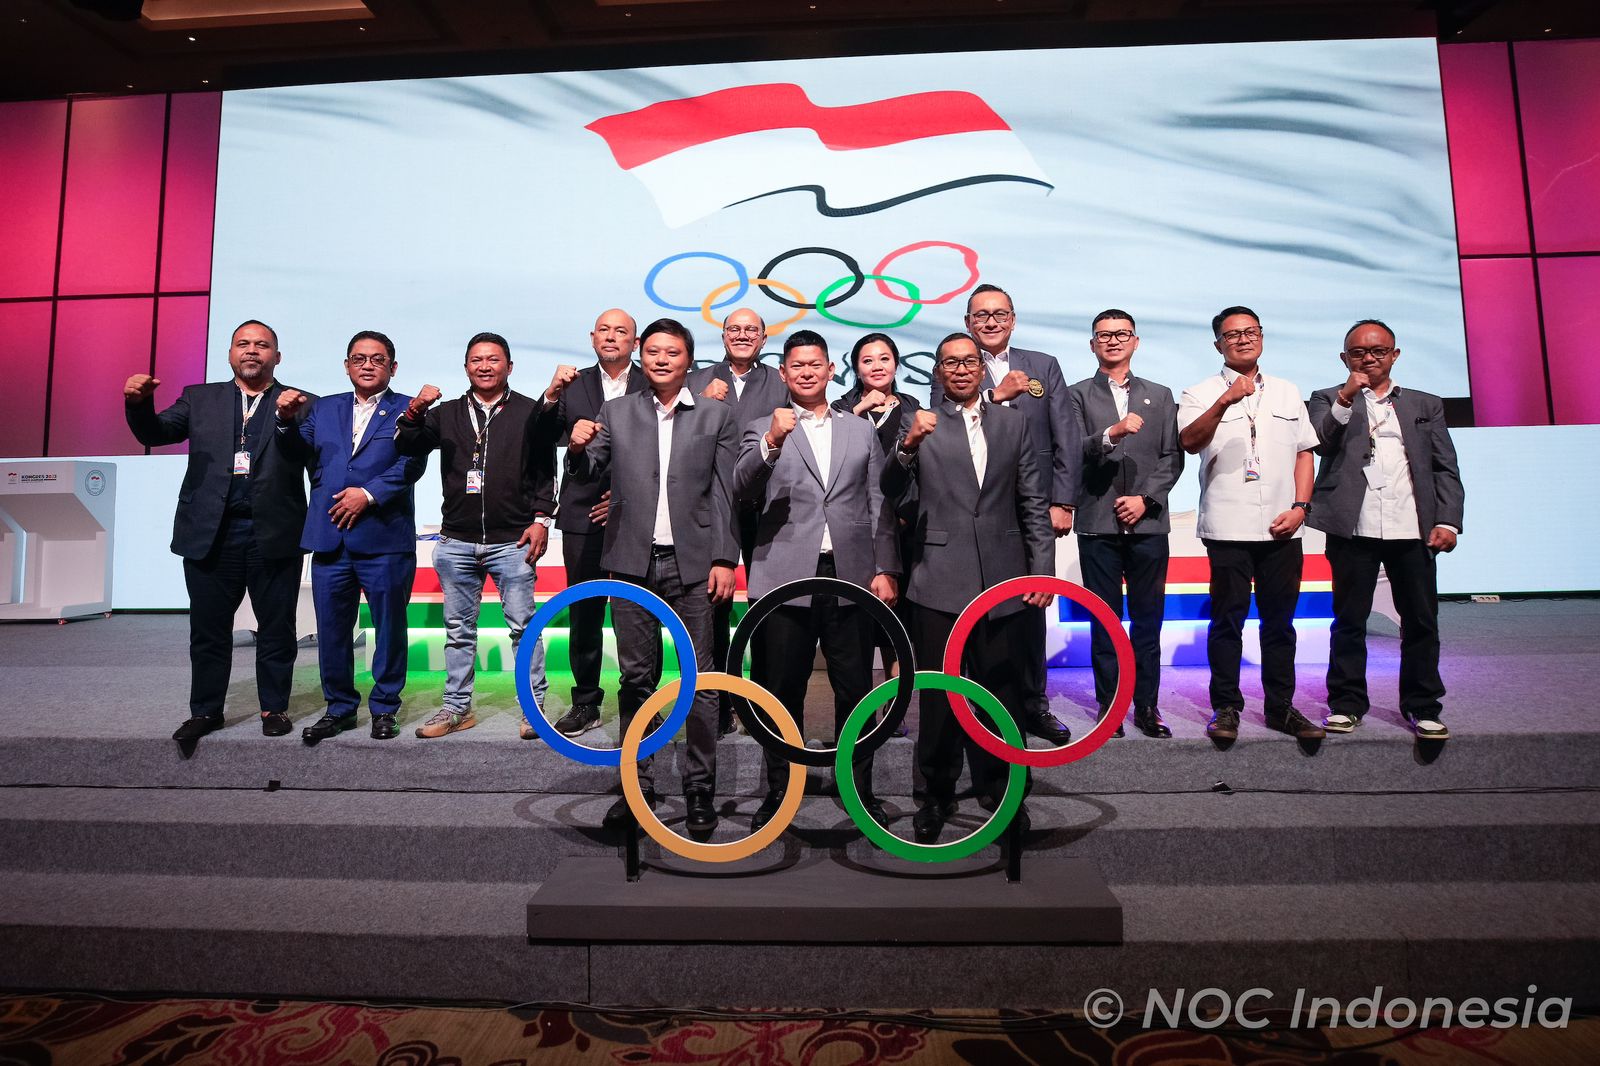 NOC Indonesia's Election: Raja Sapta Oktohari and Ismail Ning Ready to Inspire Sporting Achievements - Indonesia Olympic Commitee